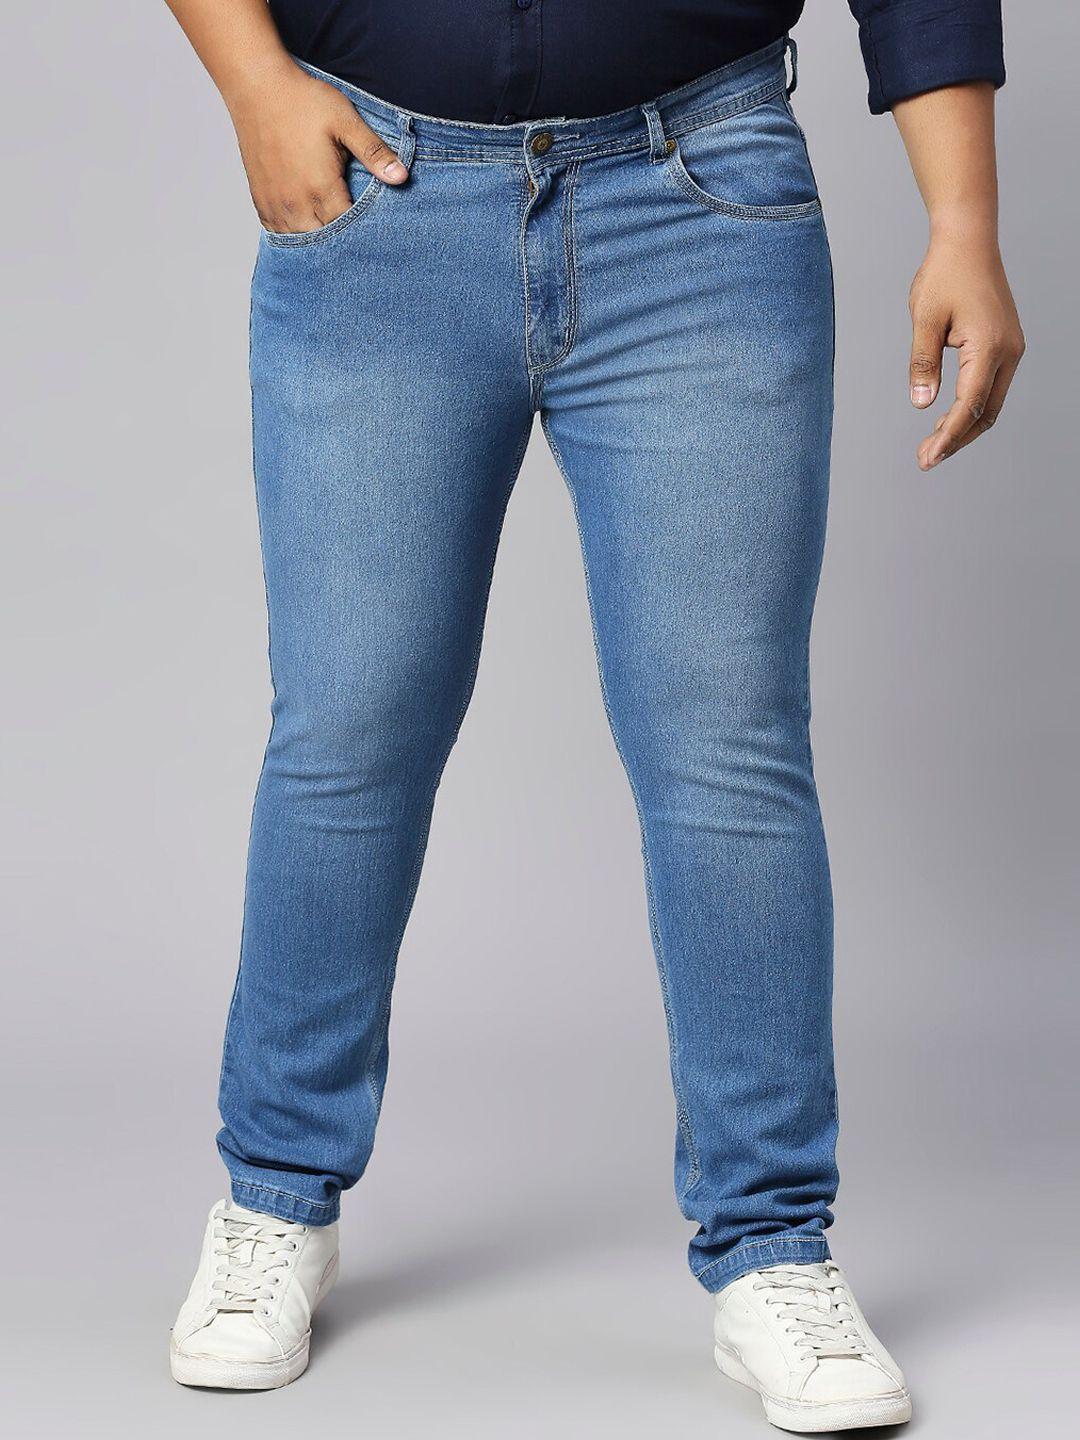 hj-hasasi-men-clean-look-light-fade-stretchable-jeans